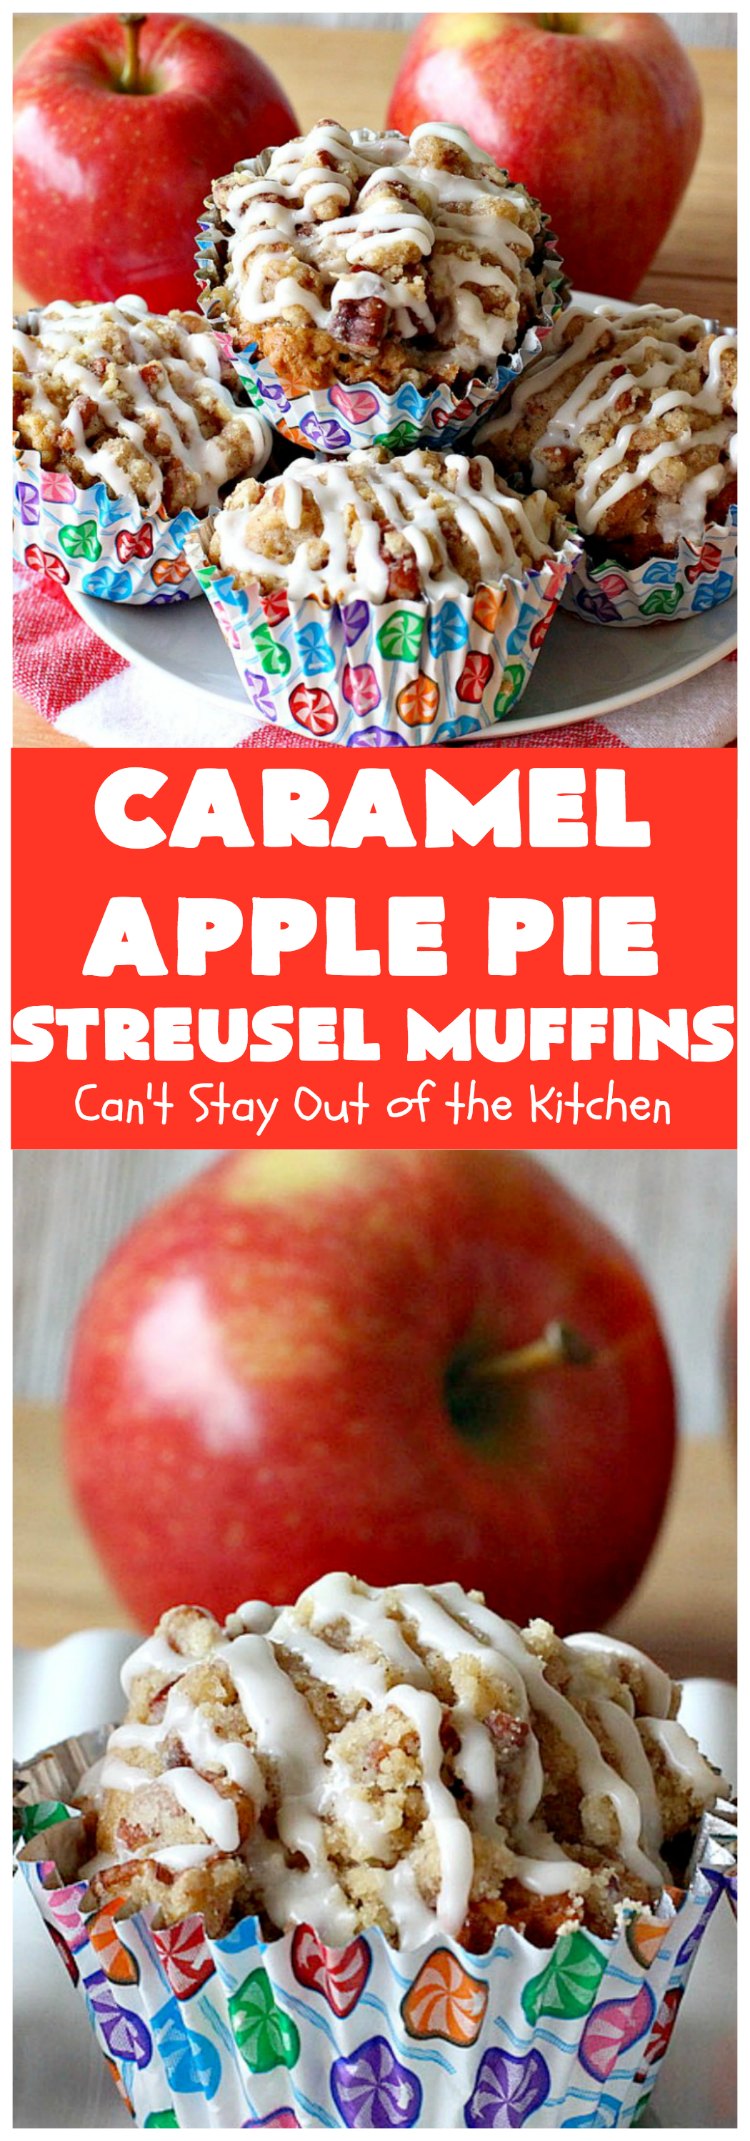 Caramel Apple Pie Streusel Muffins | Can't Stay Out of the Kitchen